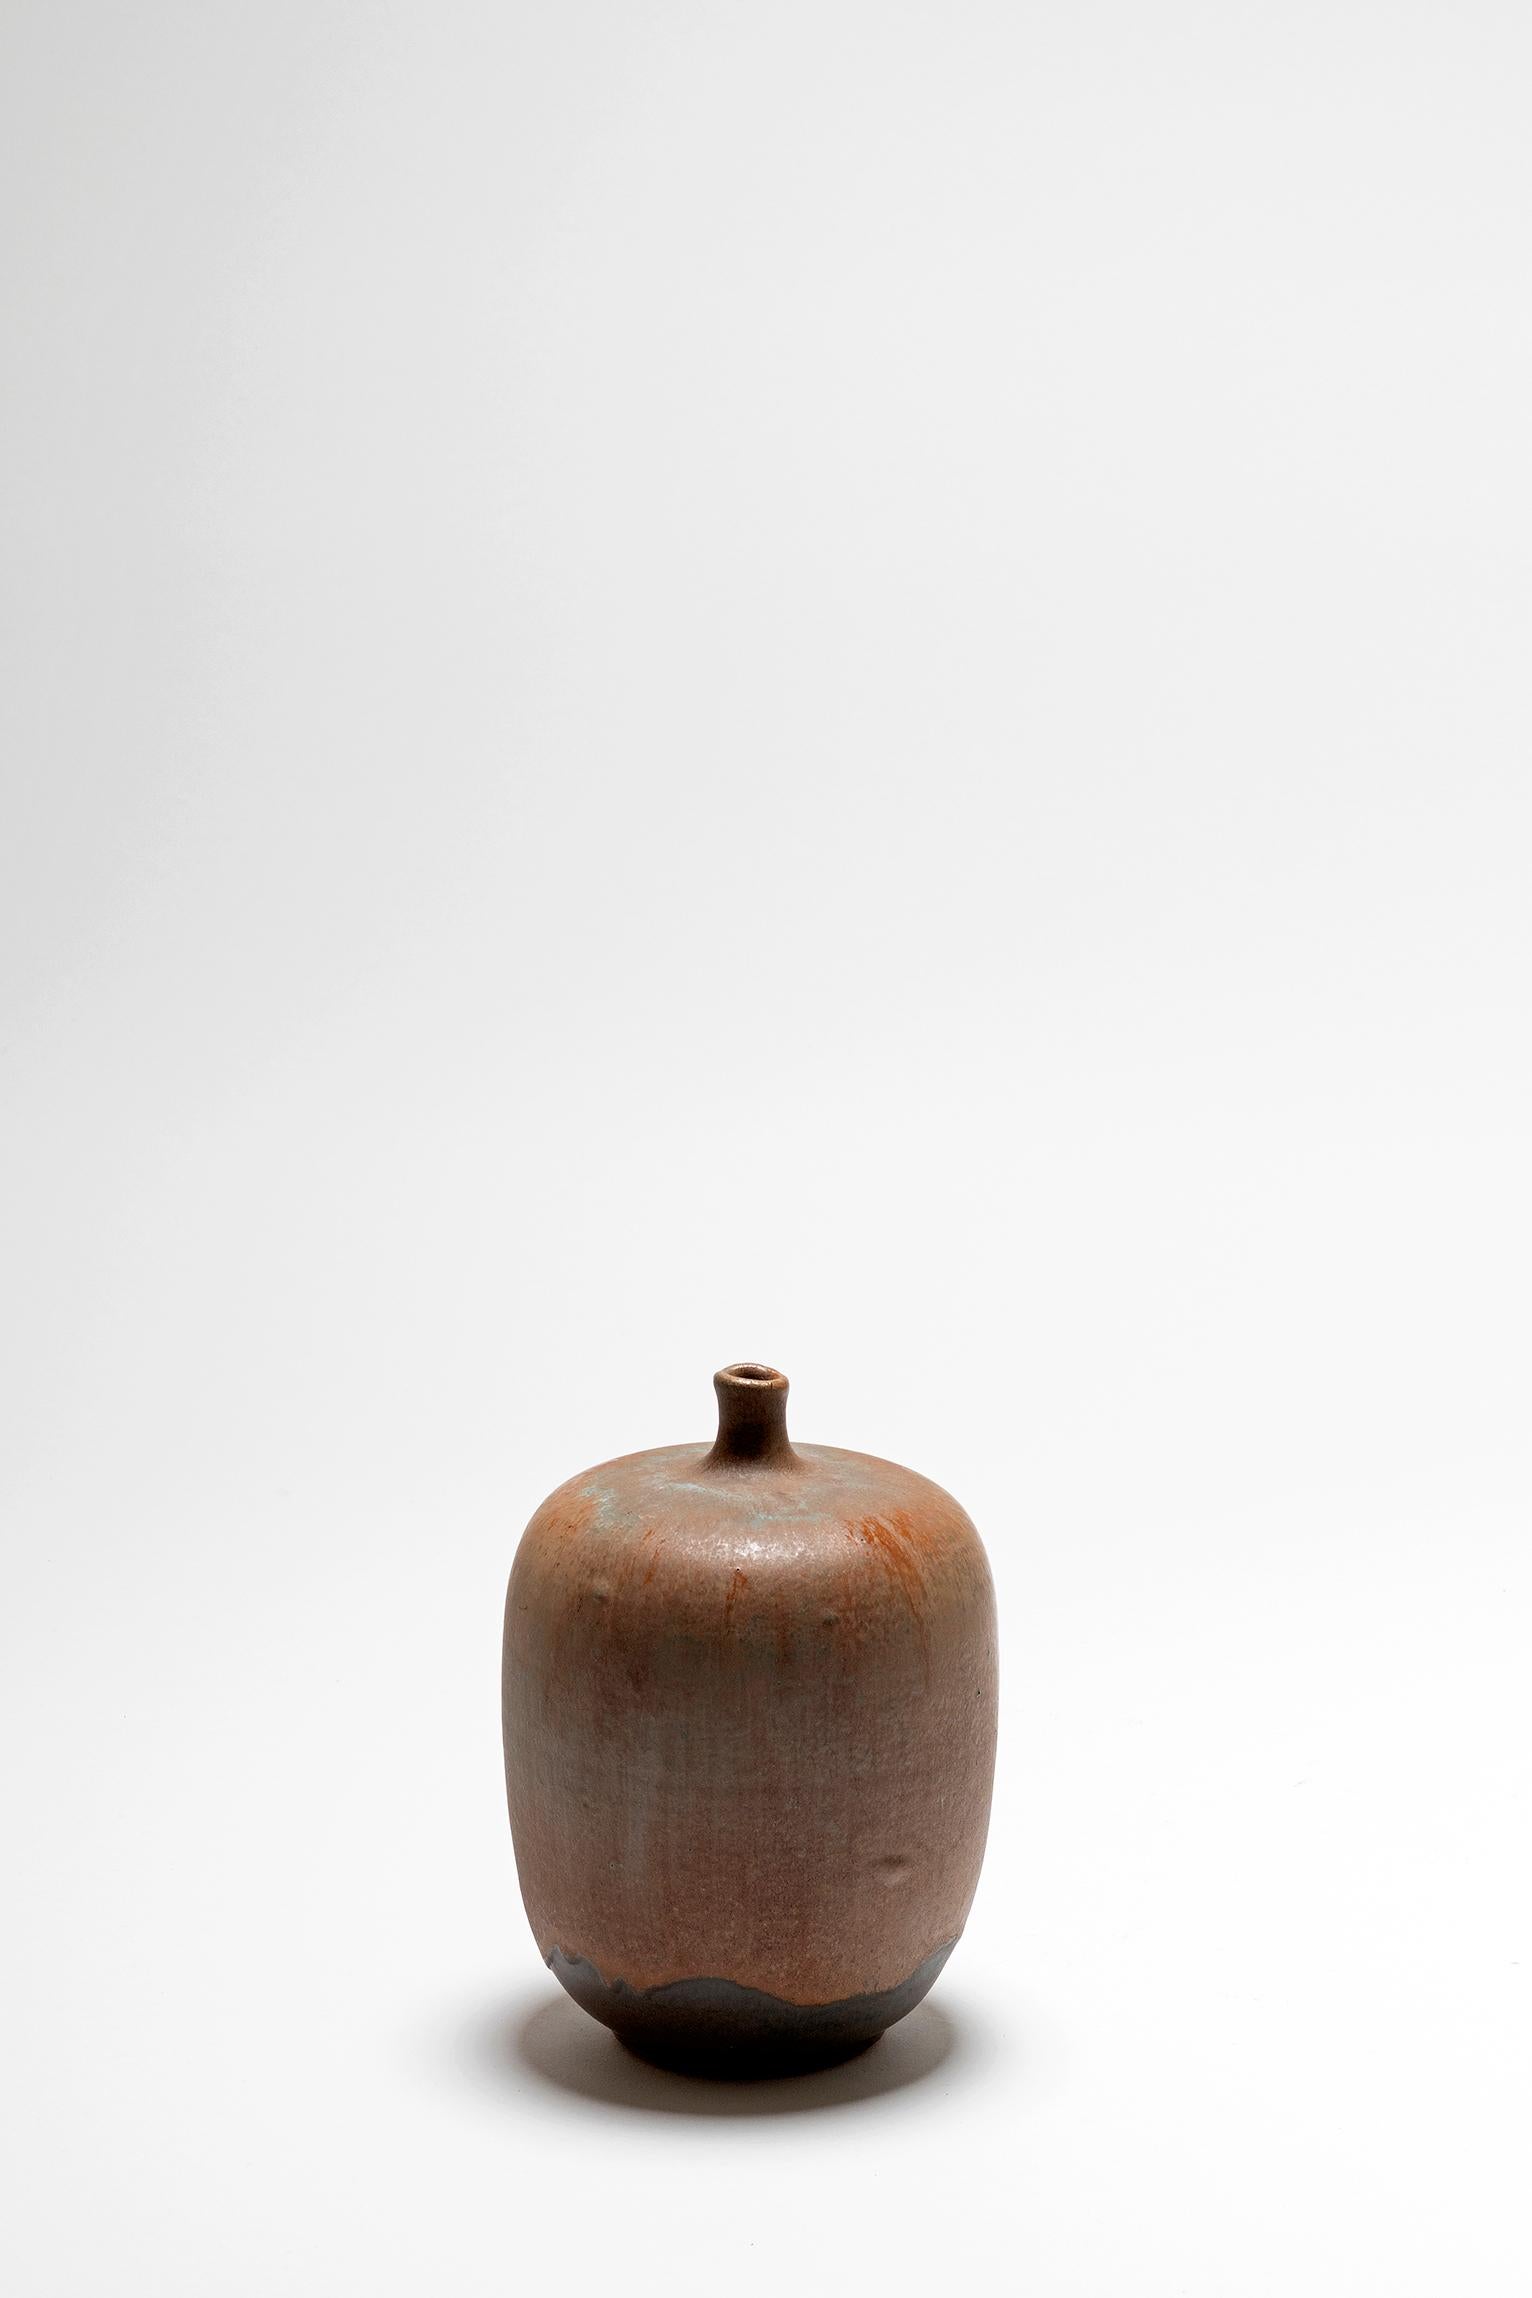 A polychrome ceramic thin neck vase
France, second half of the 20th century.